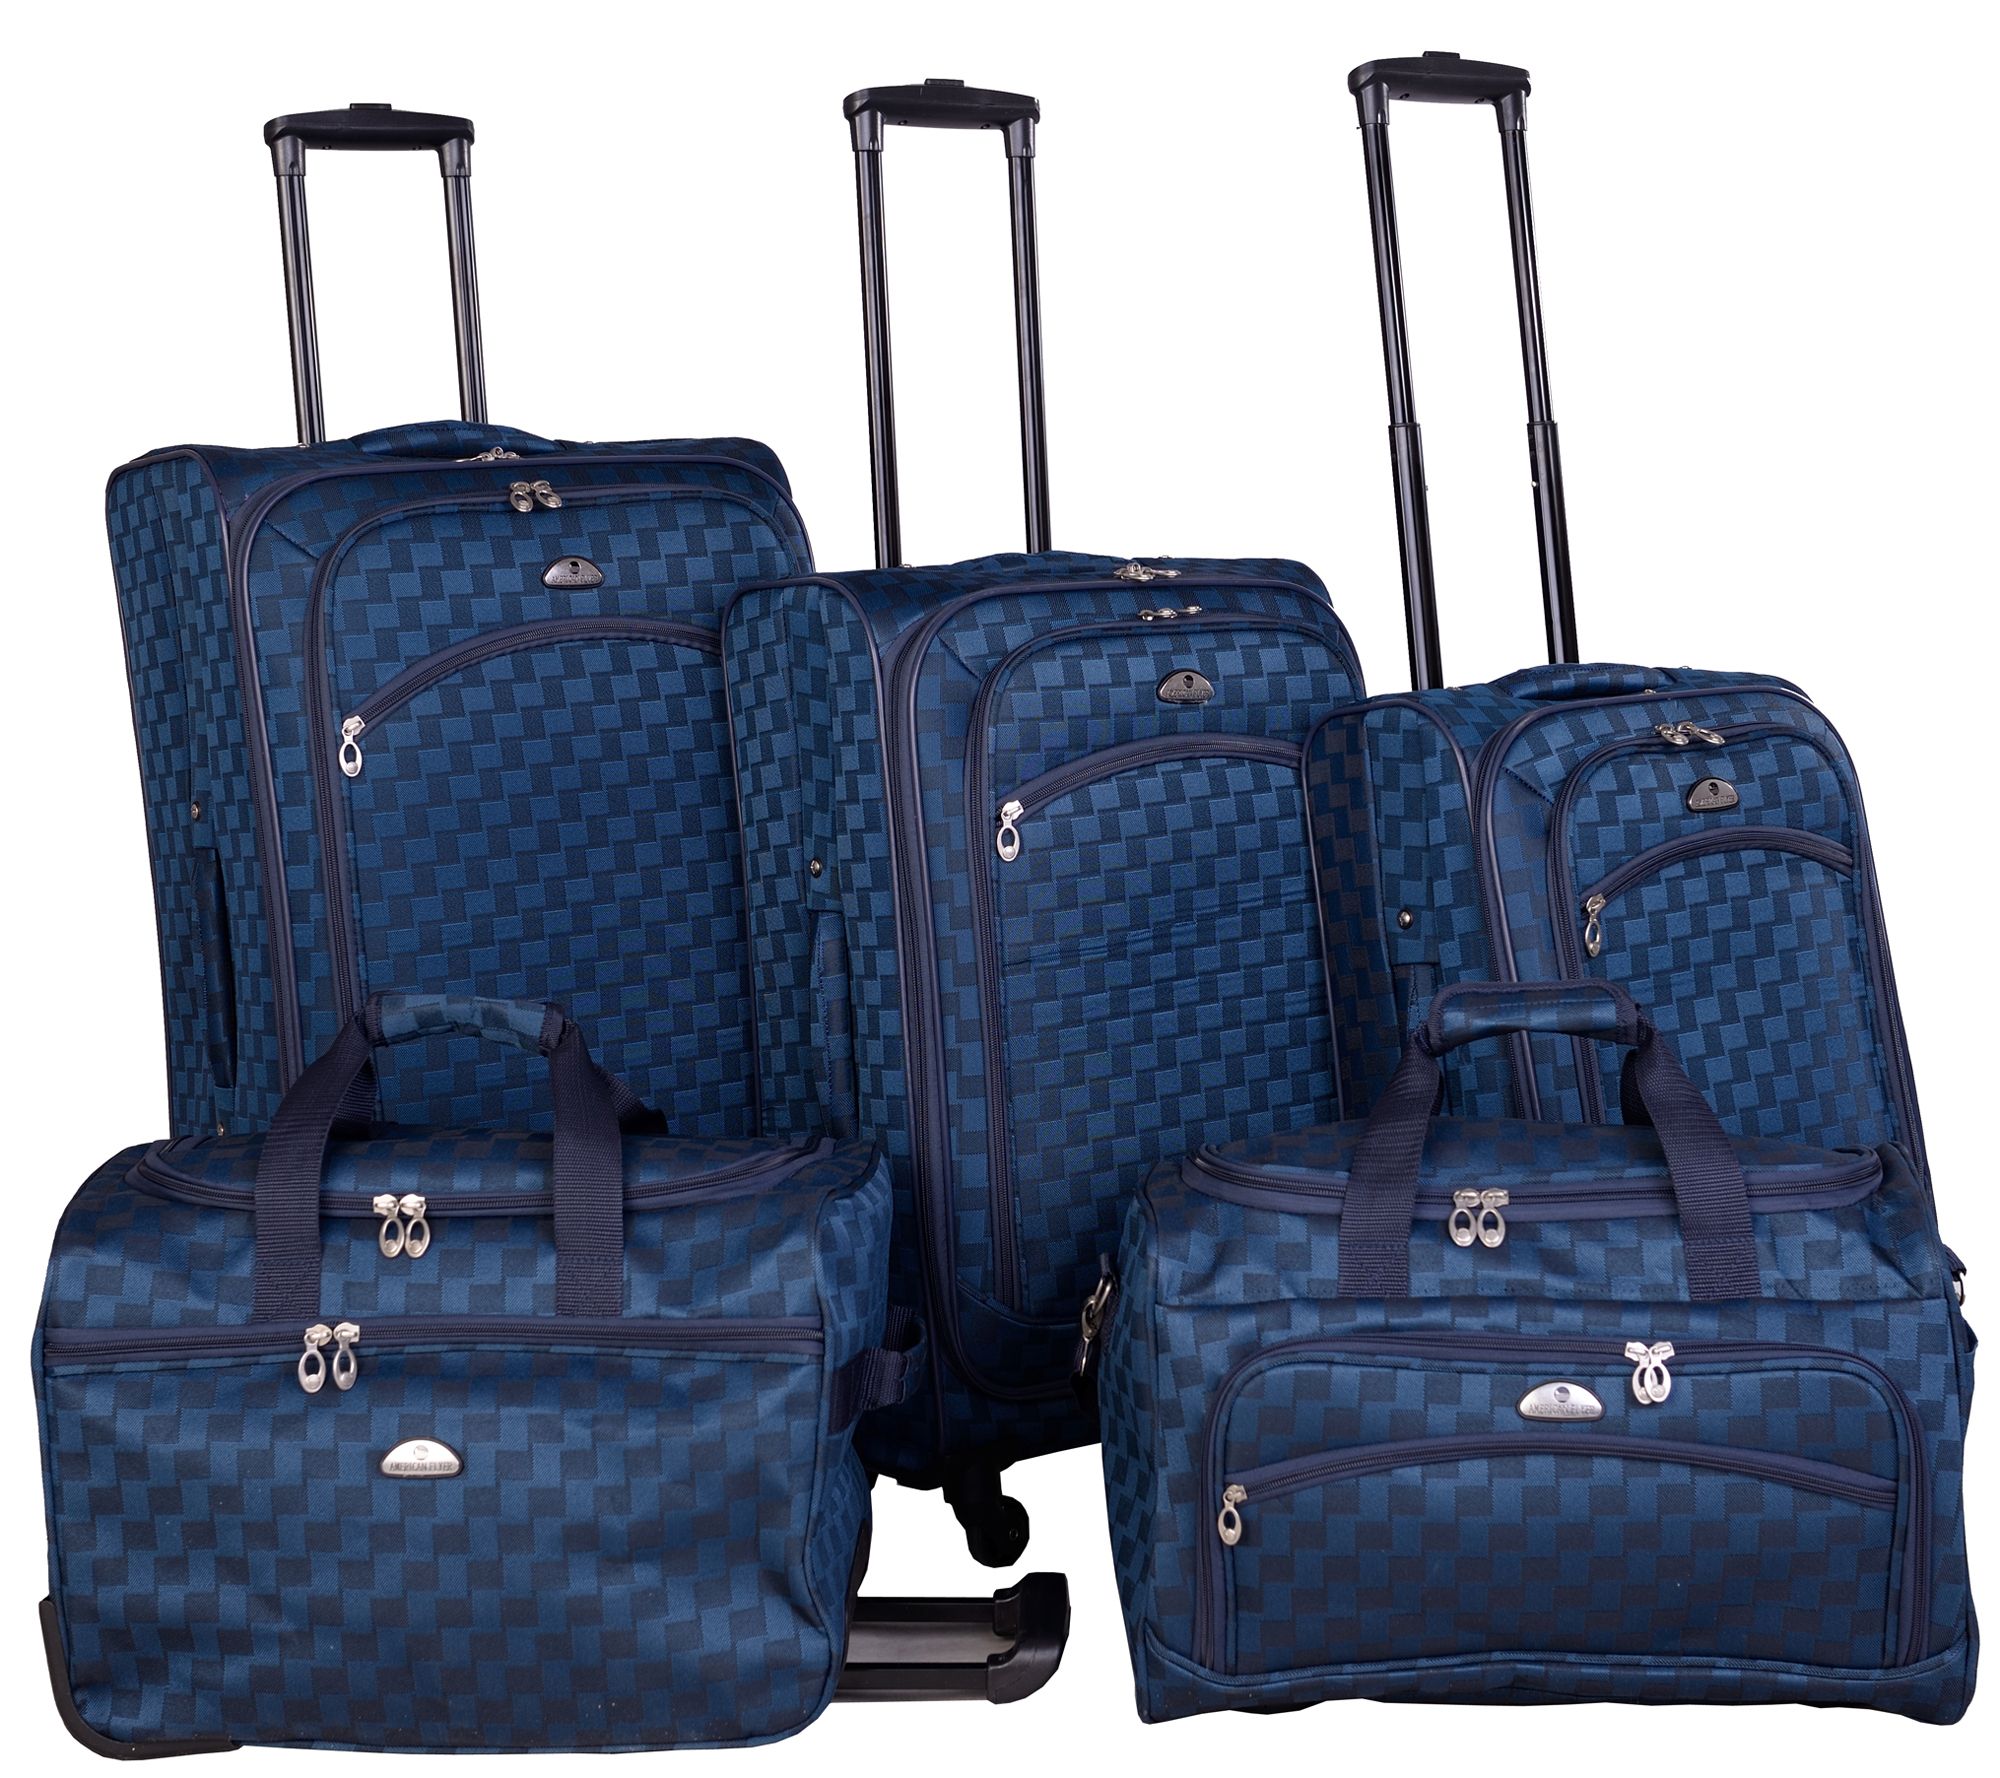  American Flyer Luggage Madrid 5 Piece Spinner Set, Brown, One  Size